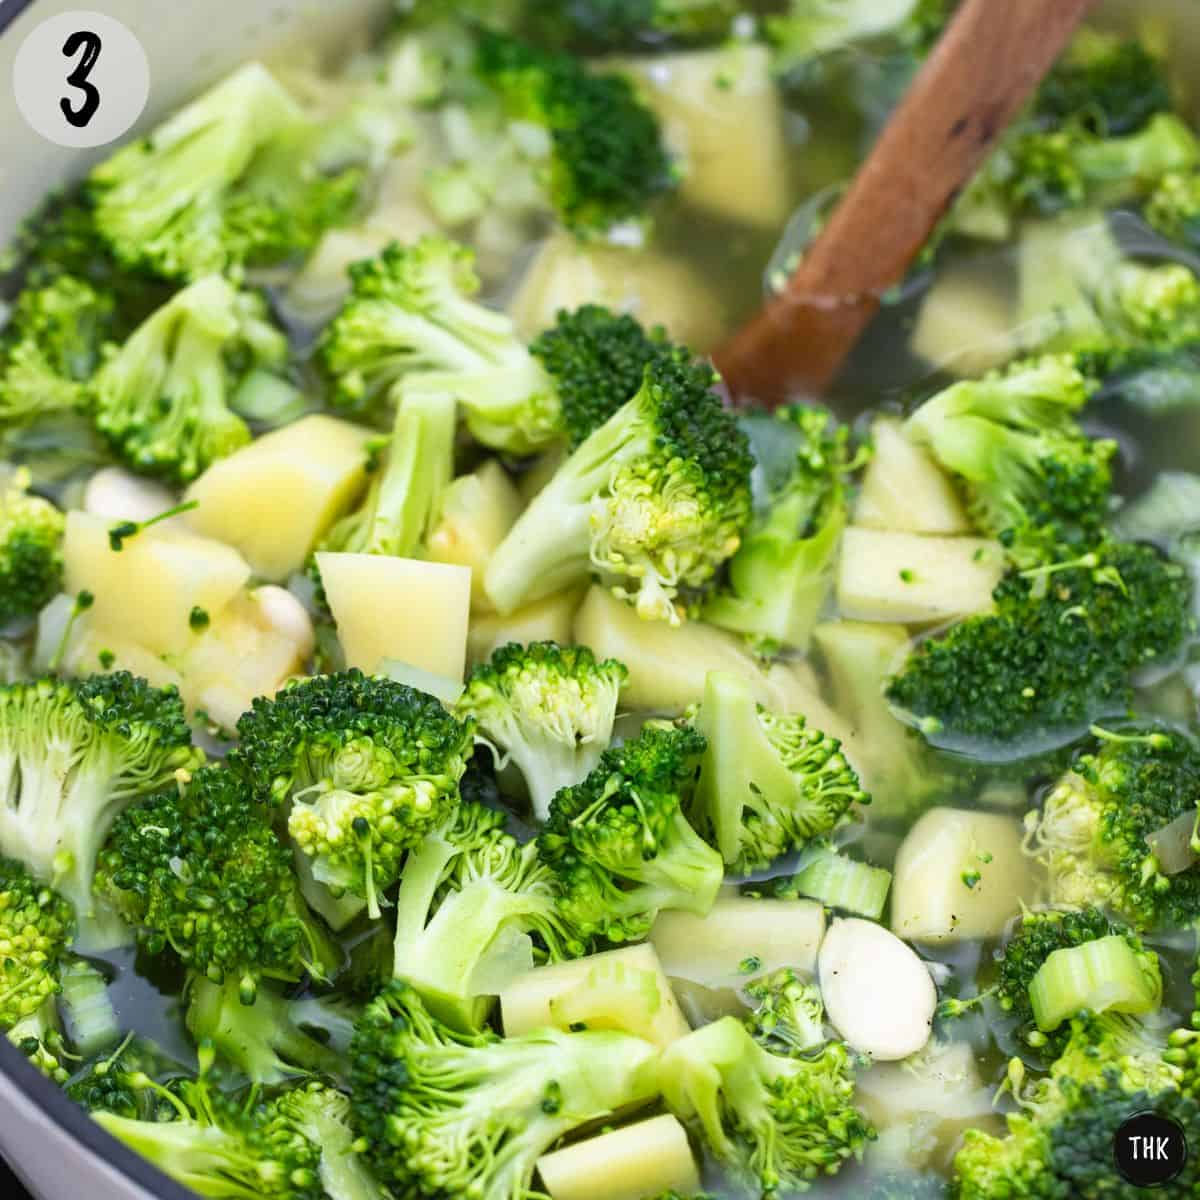 Large pot with broccoli, potatoes, almonds, and broth.